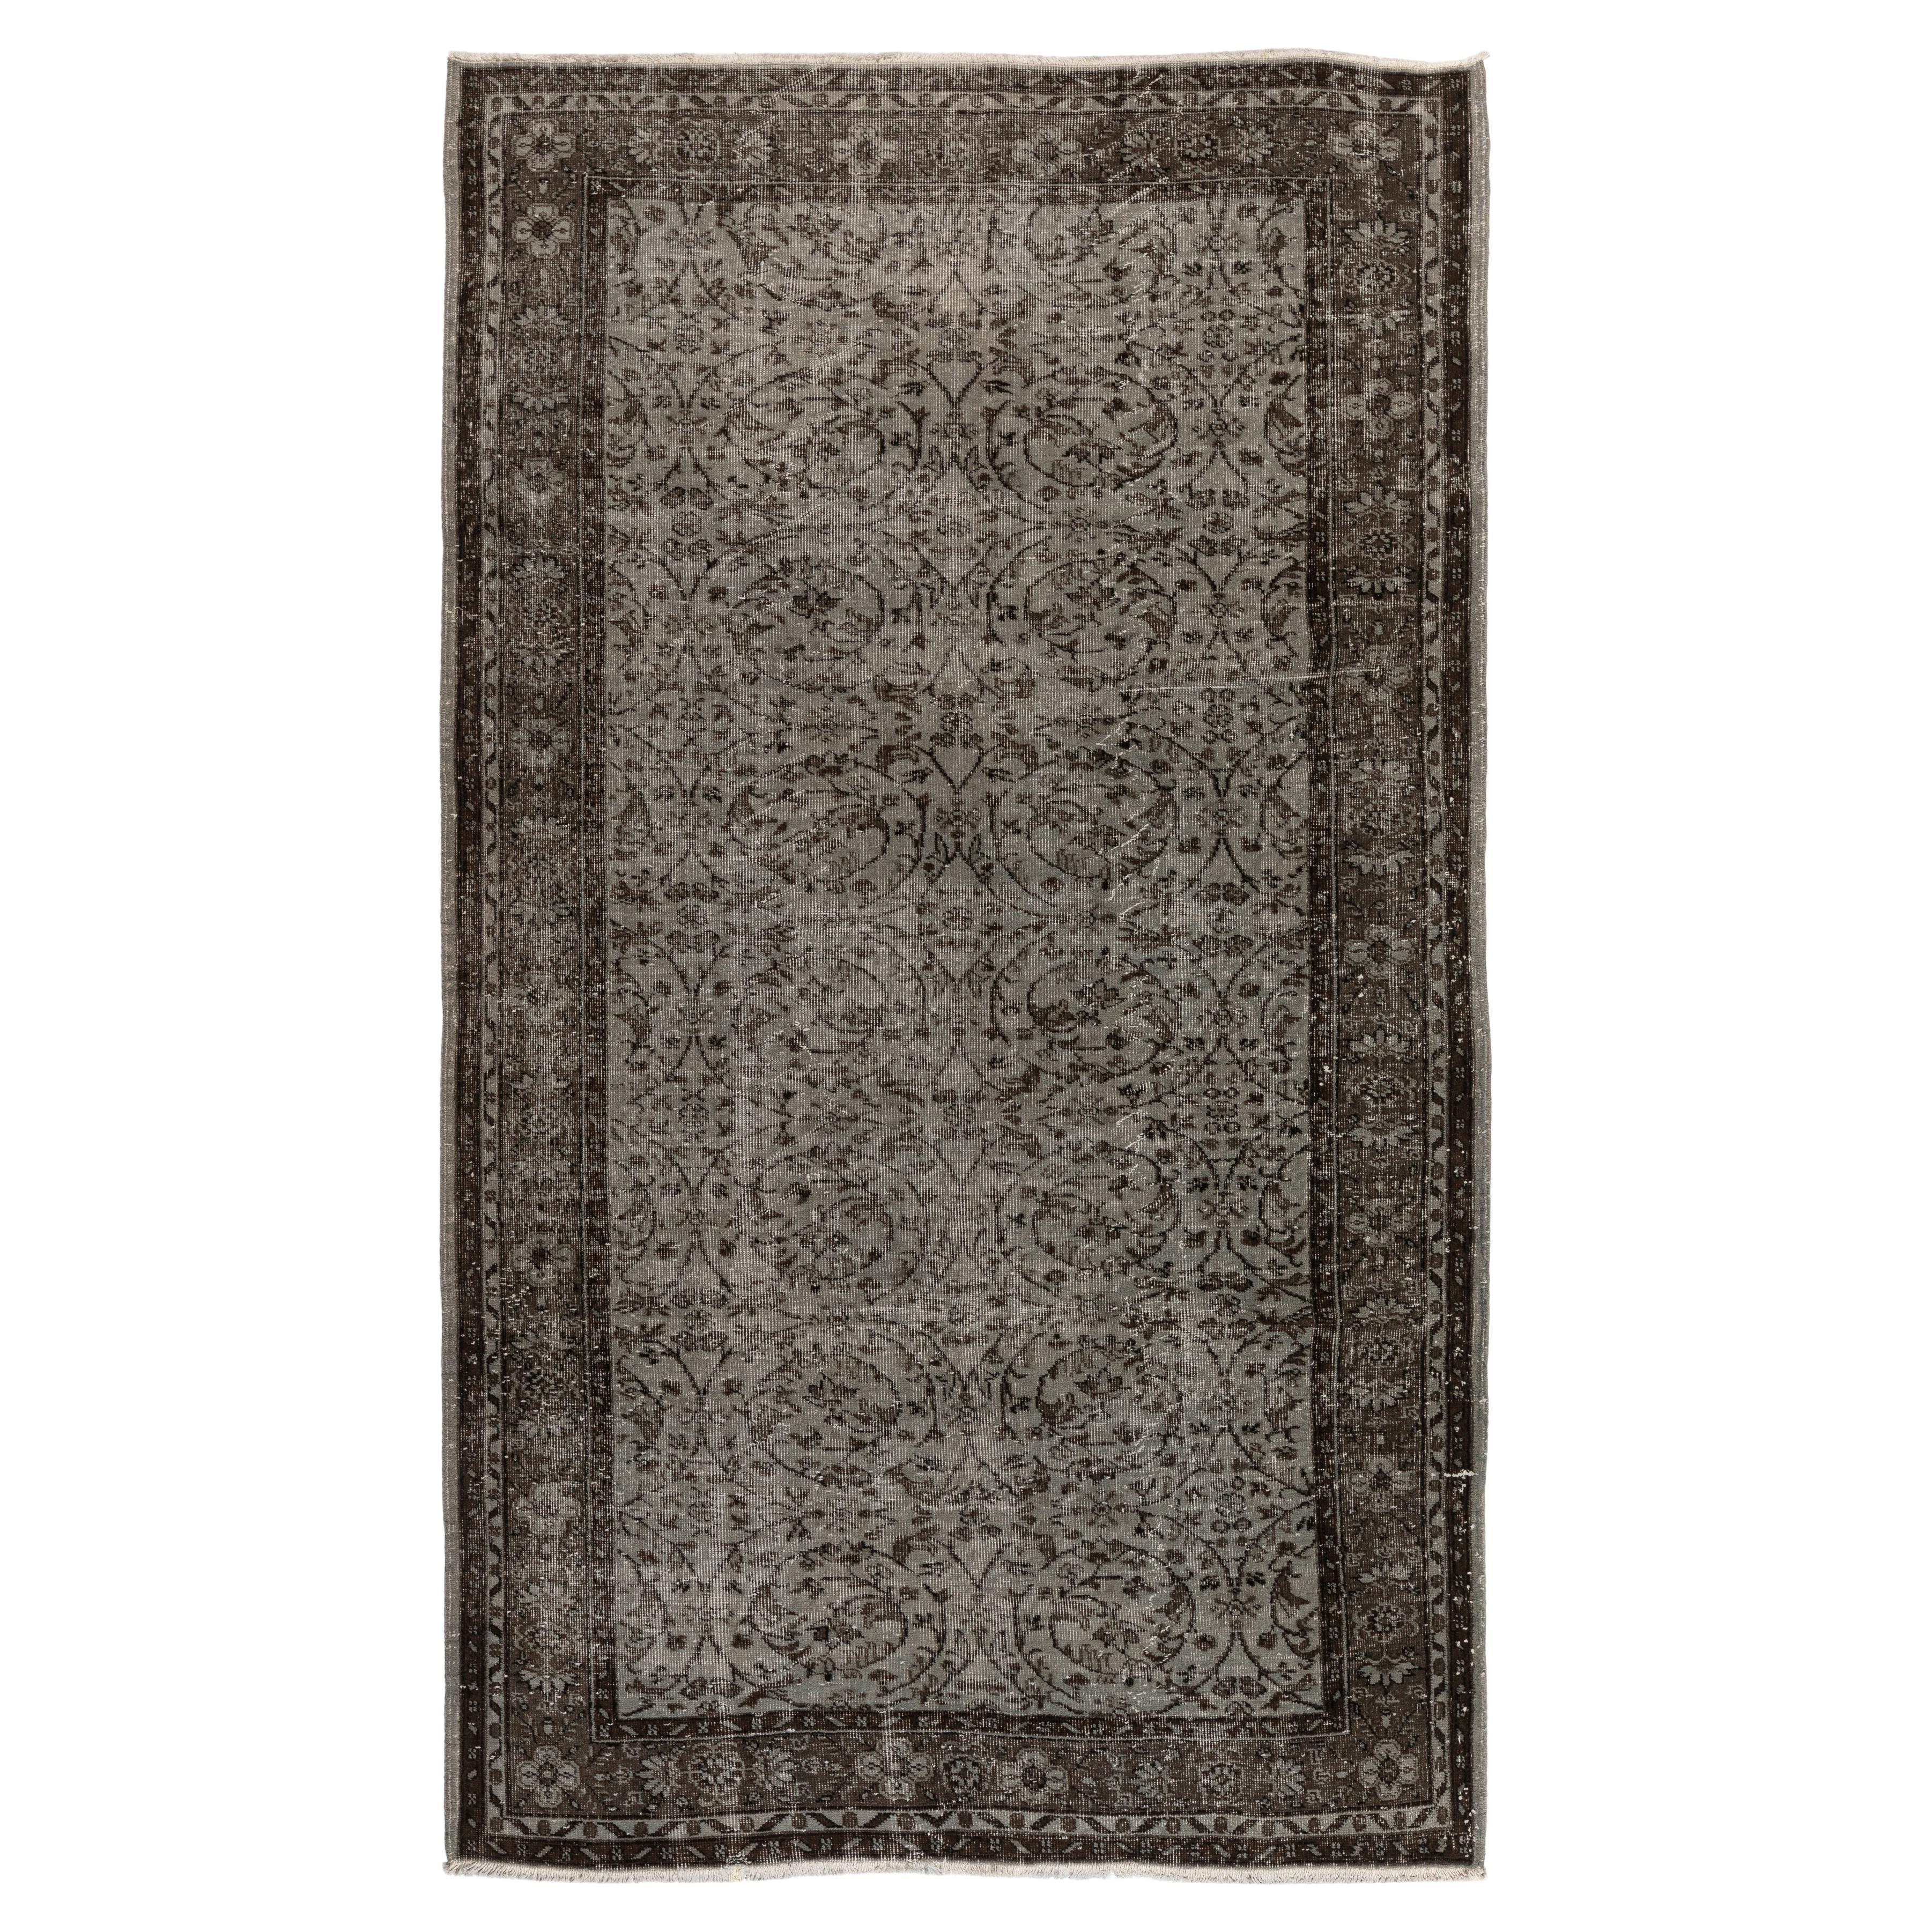 5.9x9.5 Ft Vintage Floral Motif Handmade Area Rug in Gray. Anatolian Wool Carpet For Sale